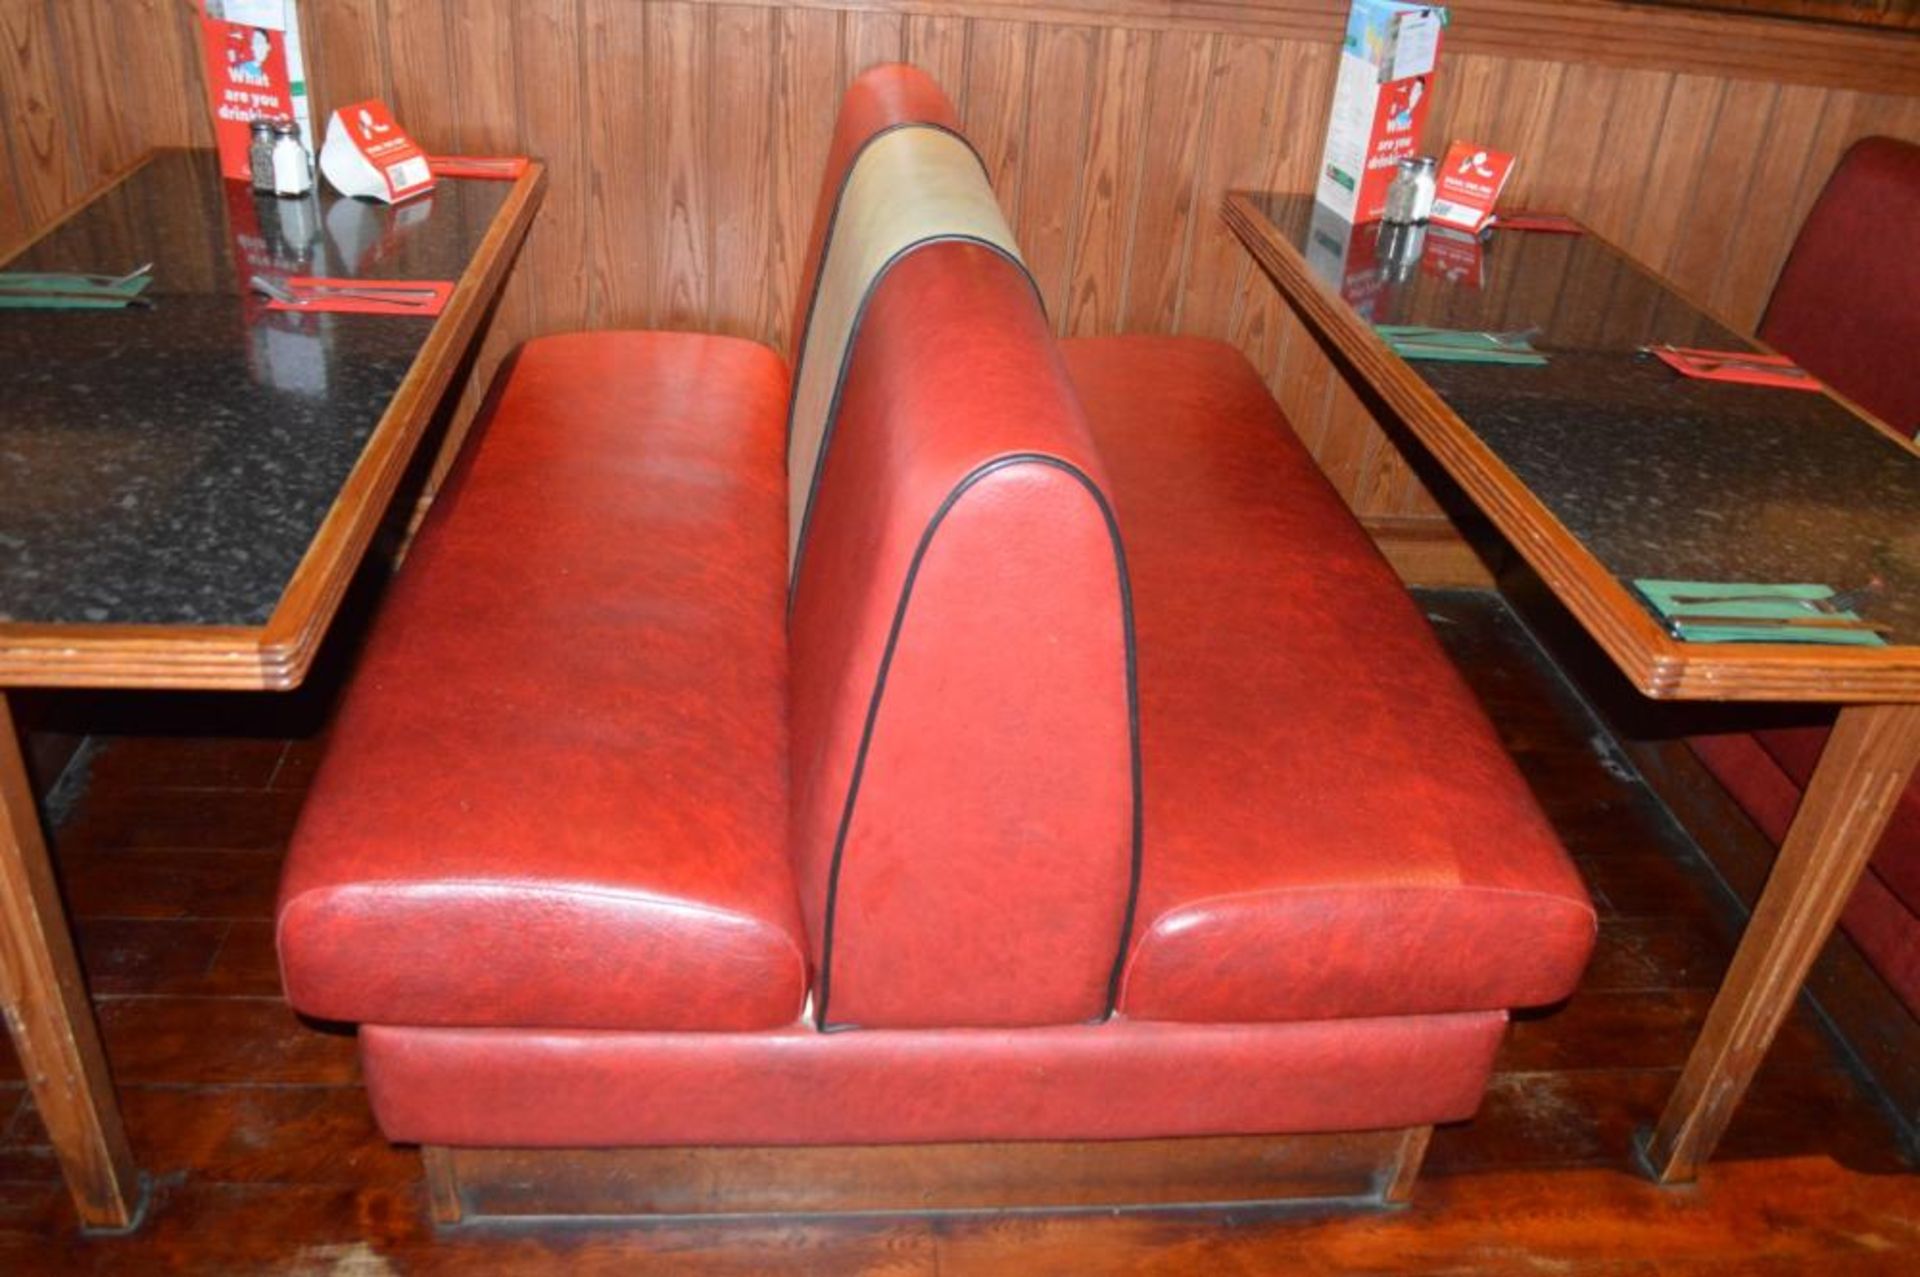 1 x Selection of Cosy Bespoke Seating Booths in a 1950's Retro American Diner Design With Dining Tab - Image 22 of 30